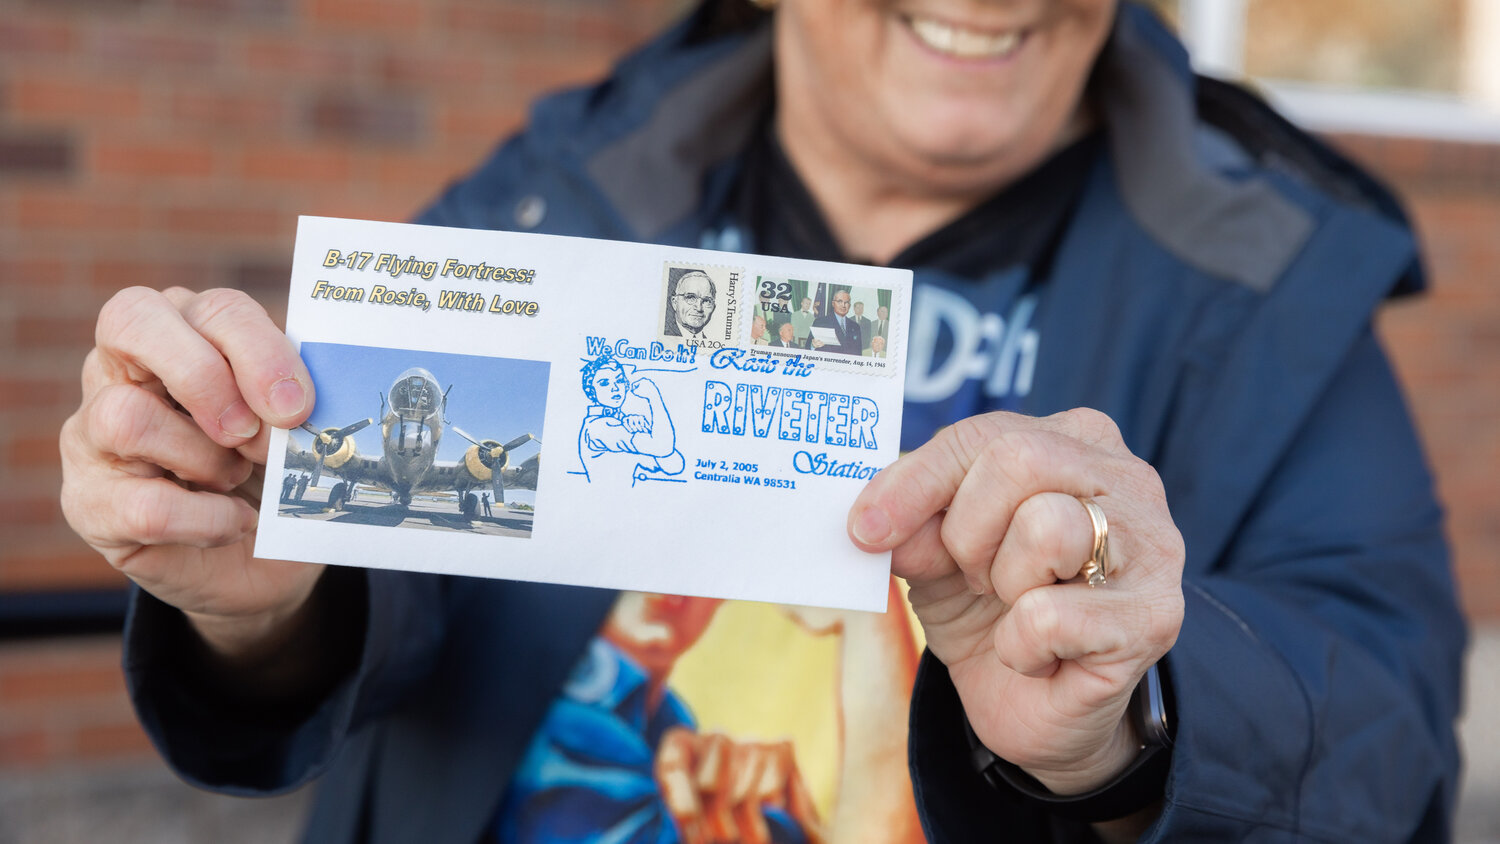 Envelopes featuring “Rosie The Riveter,” were handed out to attendees Thursday afternoon in Chehalis.